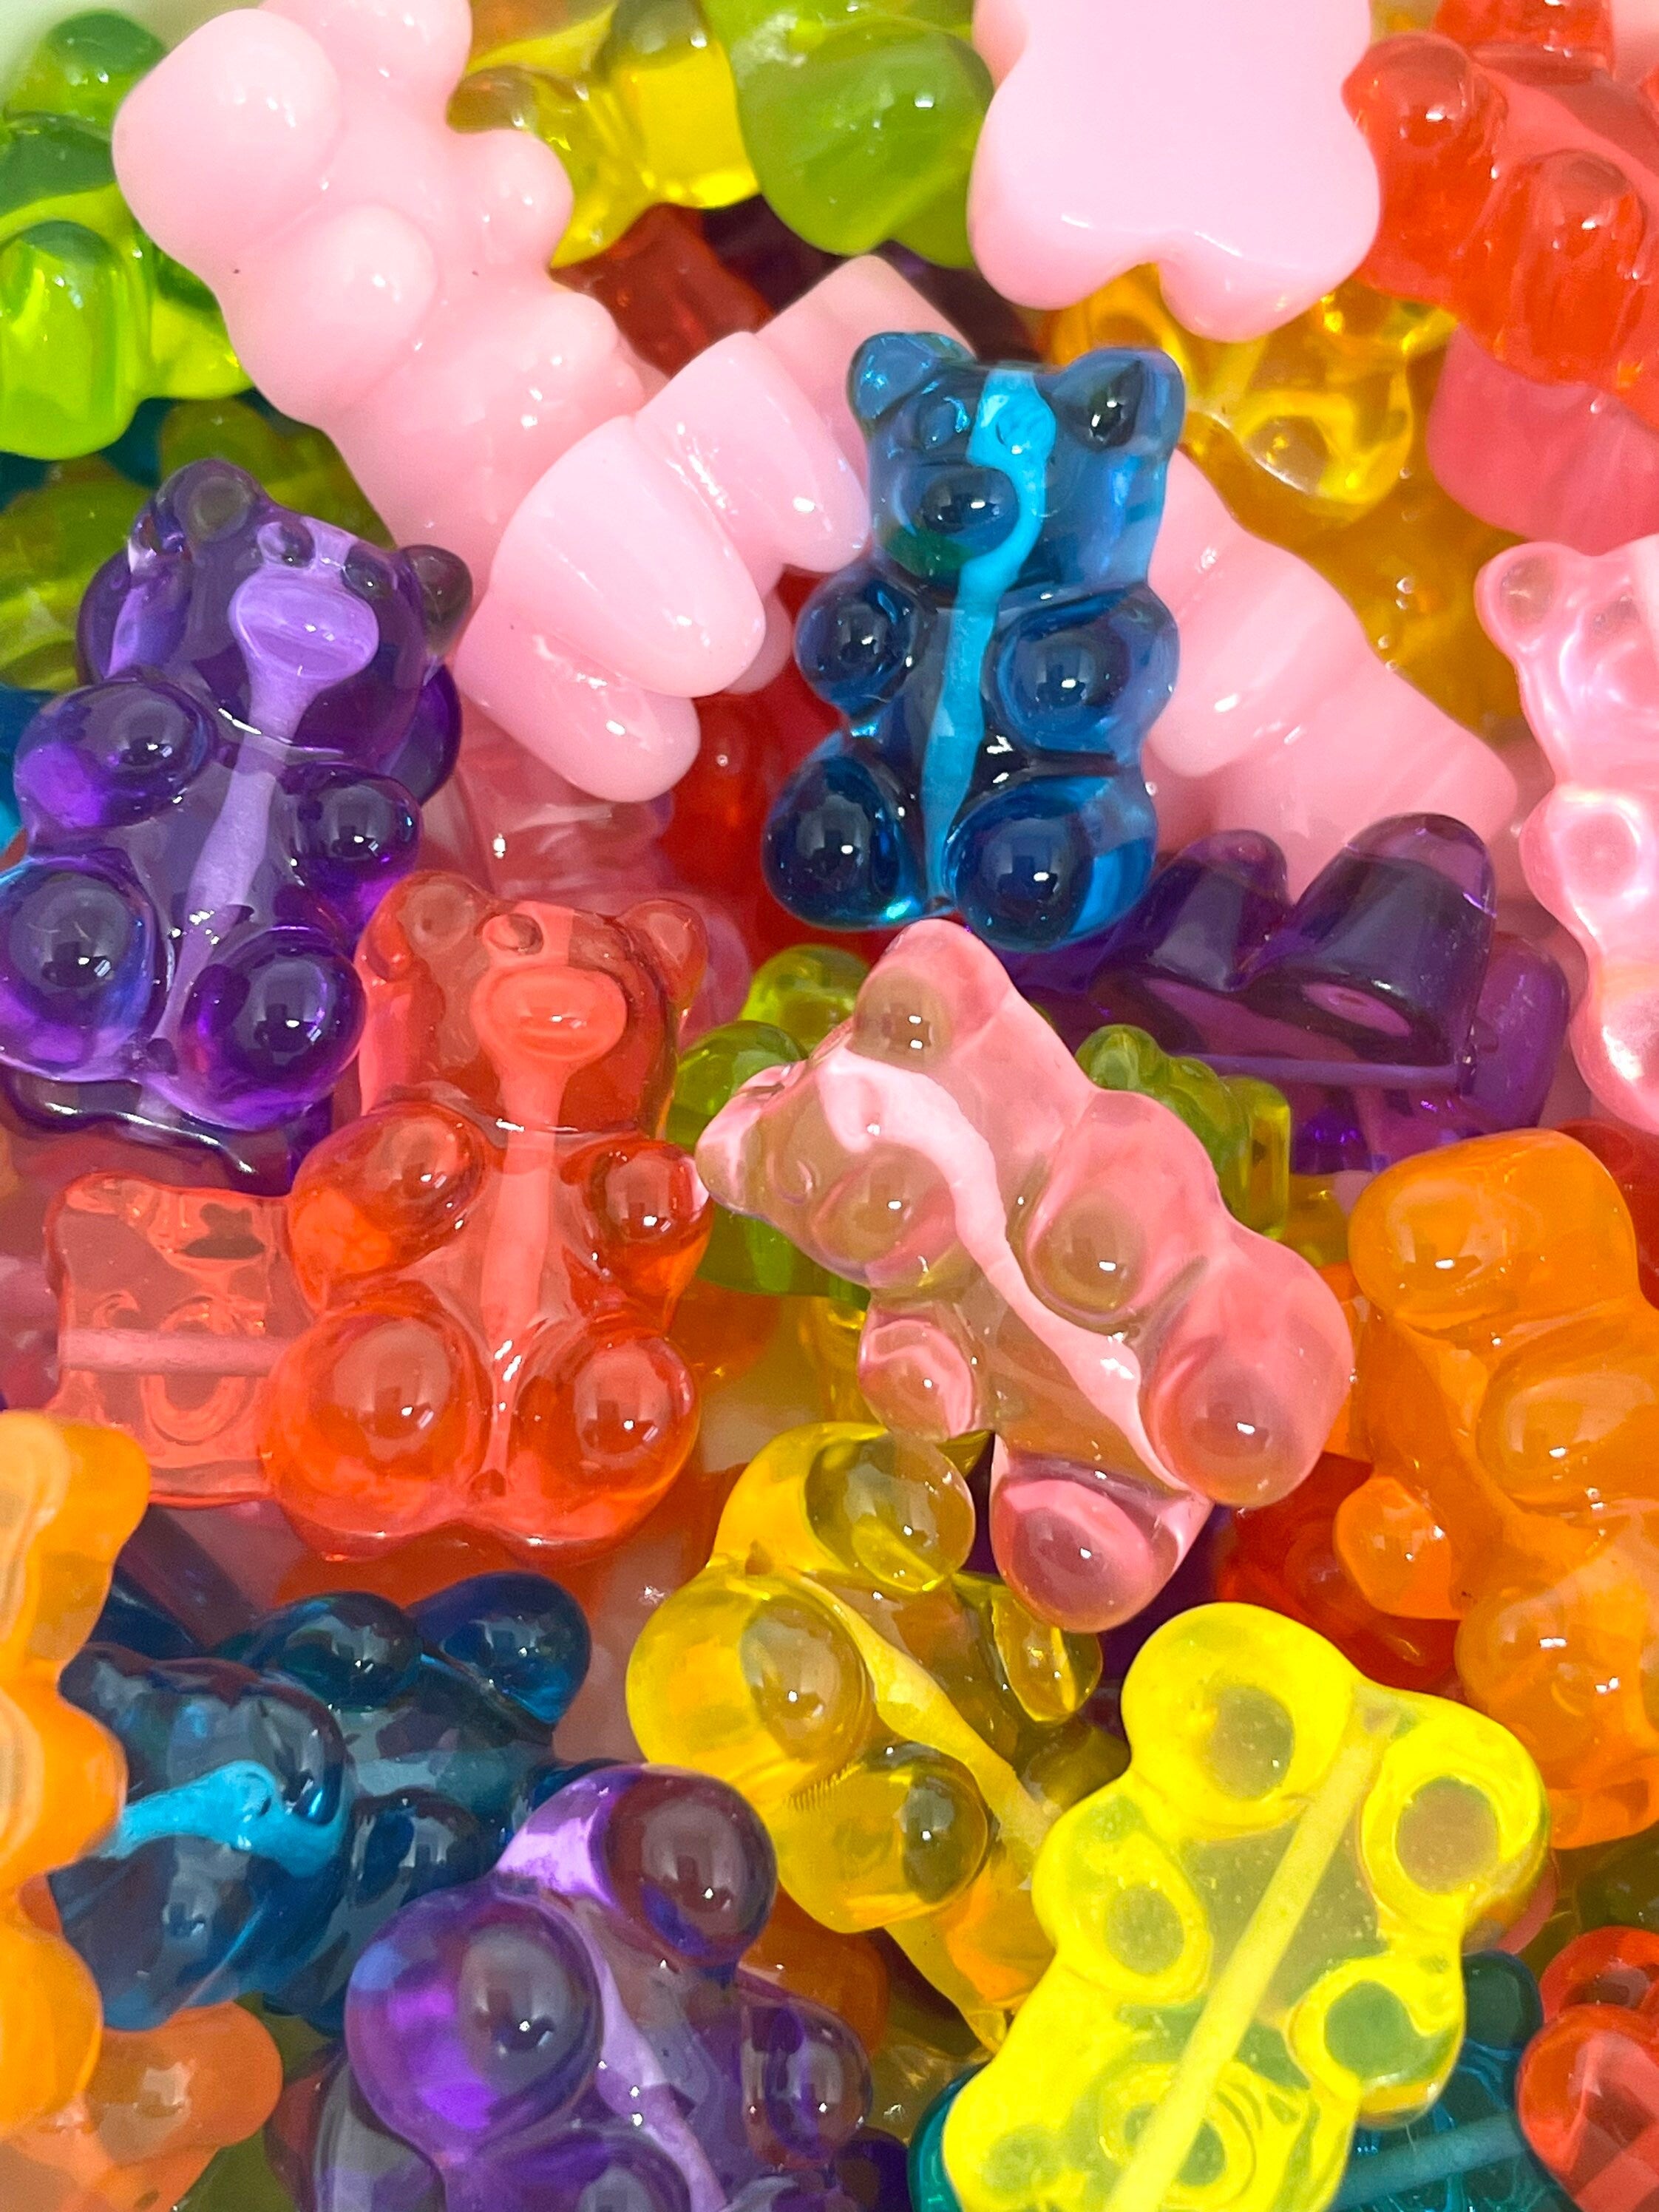 Fake Candy Gummy Bear Beads for Jewelry Making, Gummy Bear Charms for  Earrings, Bear Beads for Necklace, Resin Gummy Bears, Animal Beads